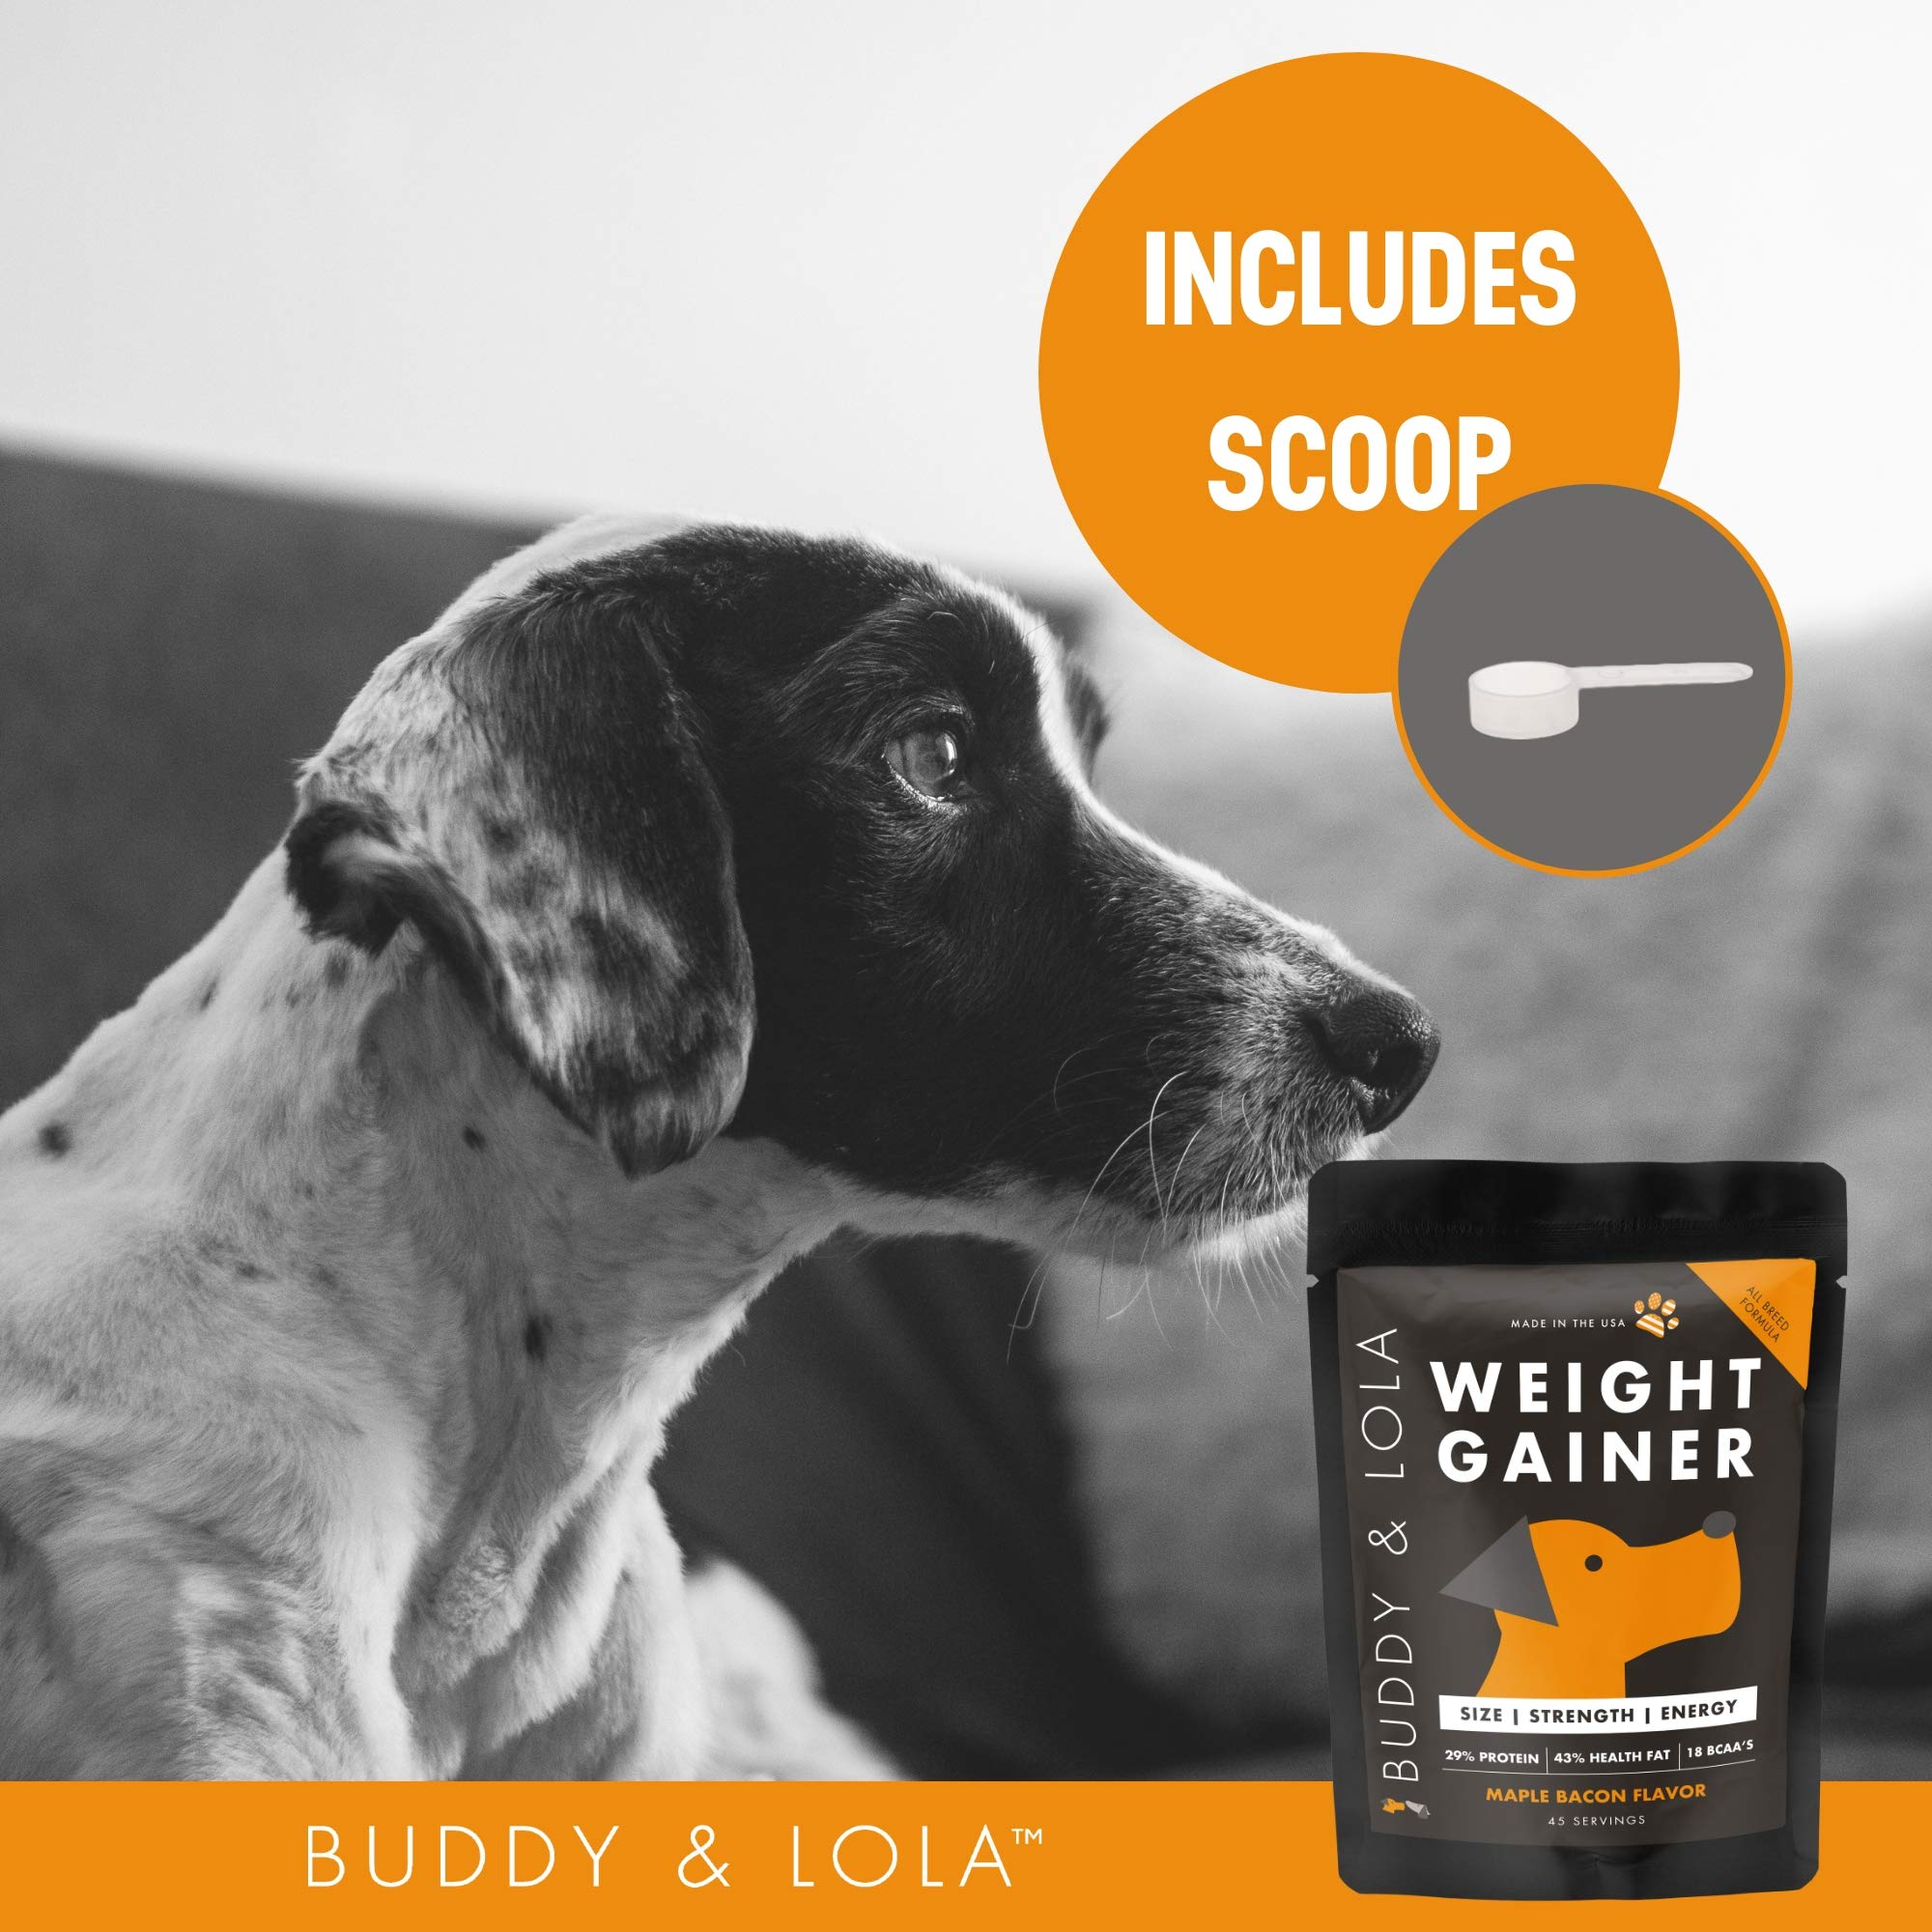 Mua Buddy & Lola Dog Weight Gainer - Dog Supplement for Weight Gain - Dog  Protien Powder for Max Muscle Builder, High Calorie Supplement for All Dogs  & Breeds inc Bully. Pro